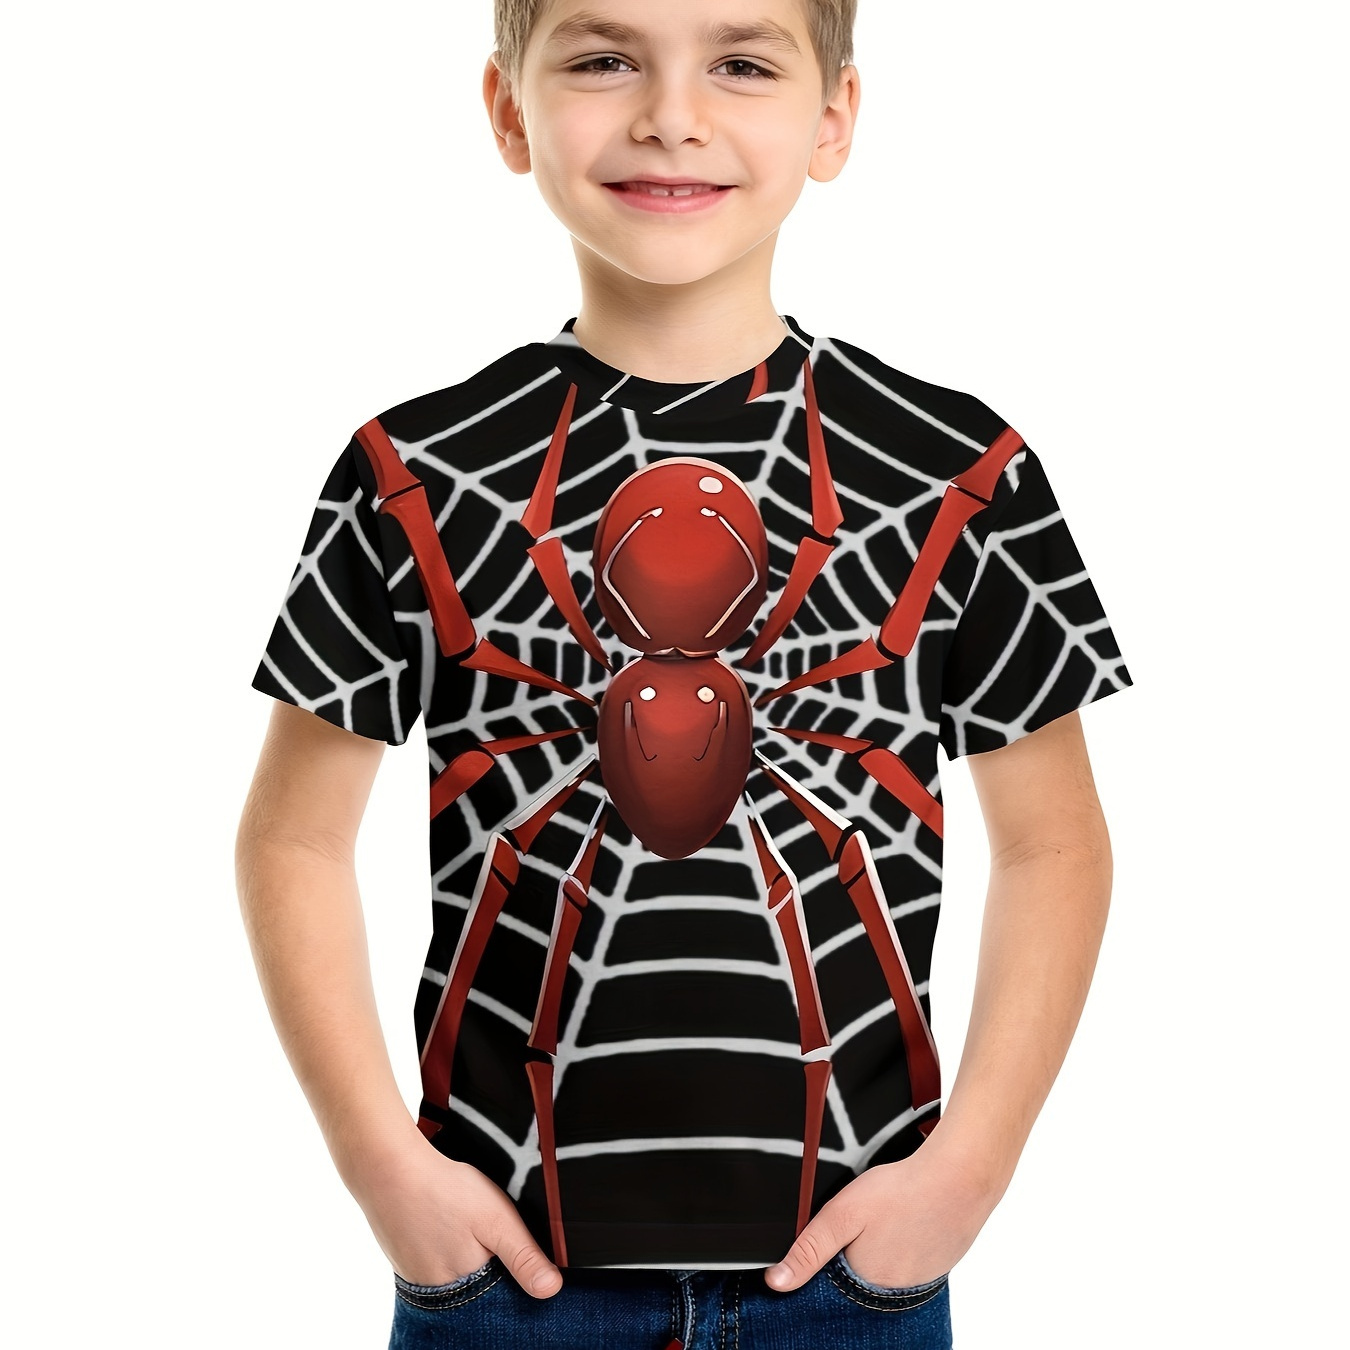 

Cool Spider 3d Print Boy's T-shirt, Casual Short Sleeve Breathable Comfy Summer Outdoor Tops